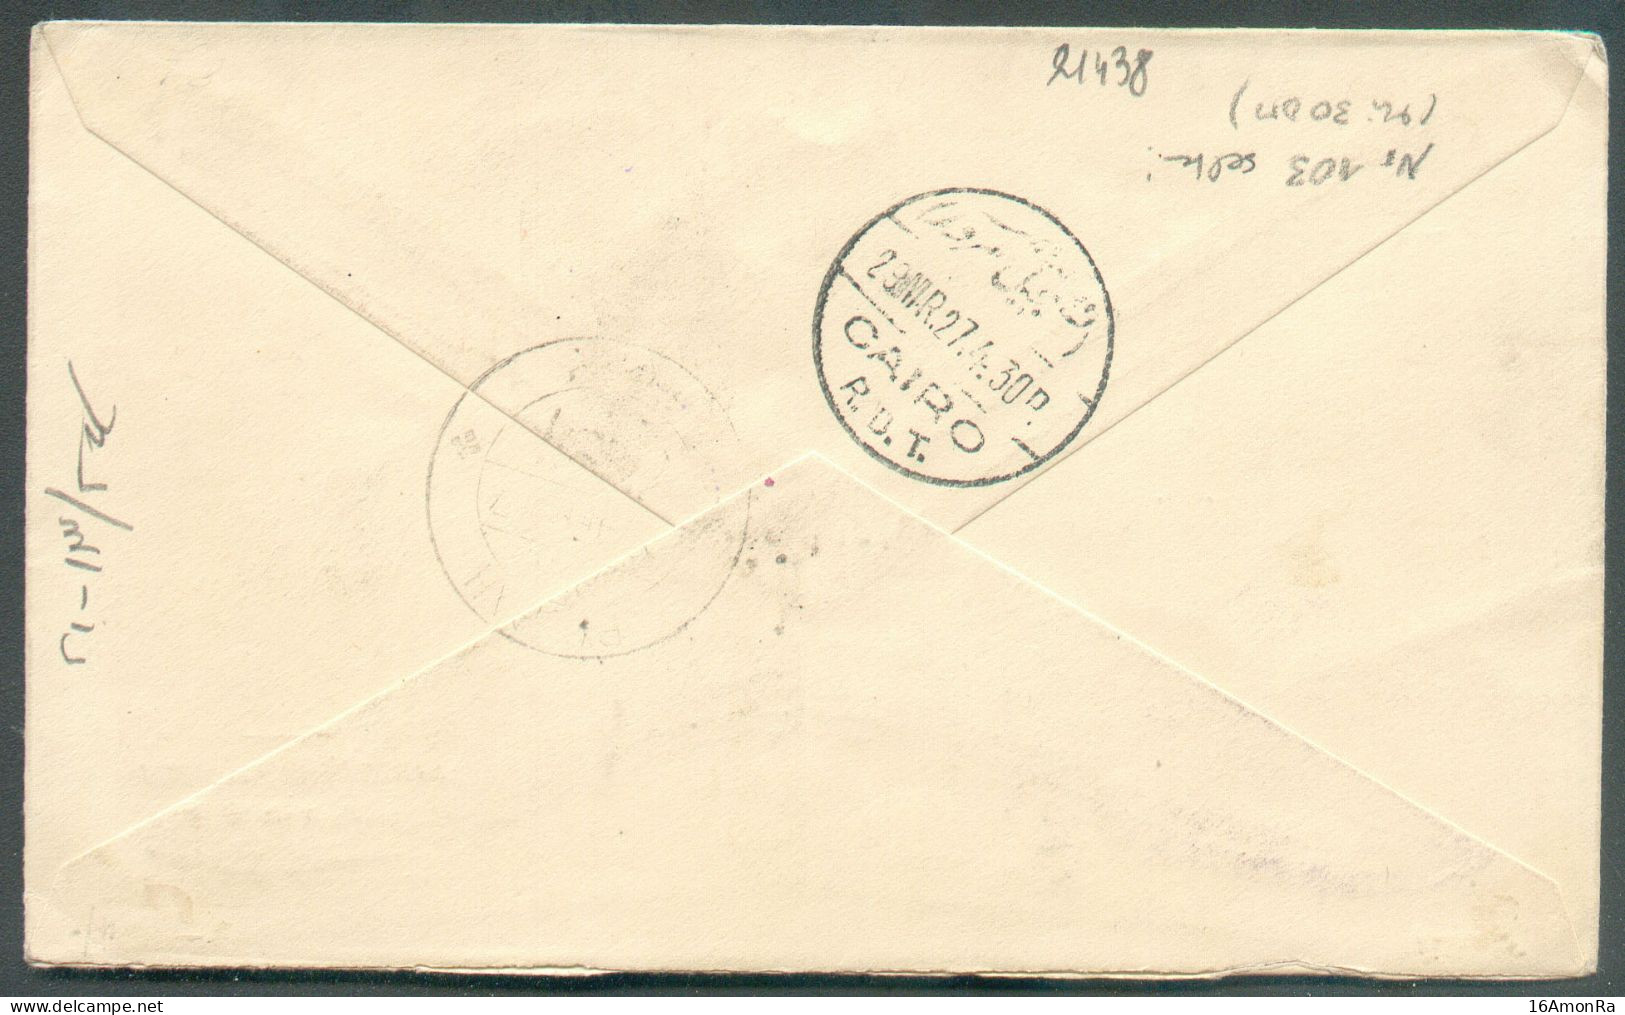 27pi PA. + Issue CONGRES INTERNATIONAL DU COTON 1927 Cacn. ALEXANDRIA On Regisetred Cover + Air Mail 29 March 1927 To Ba - Aéreo